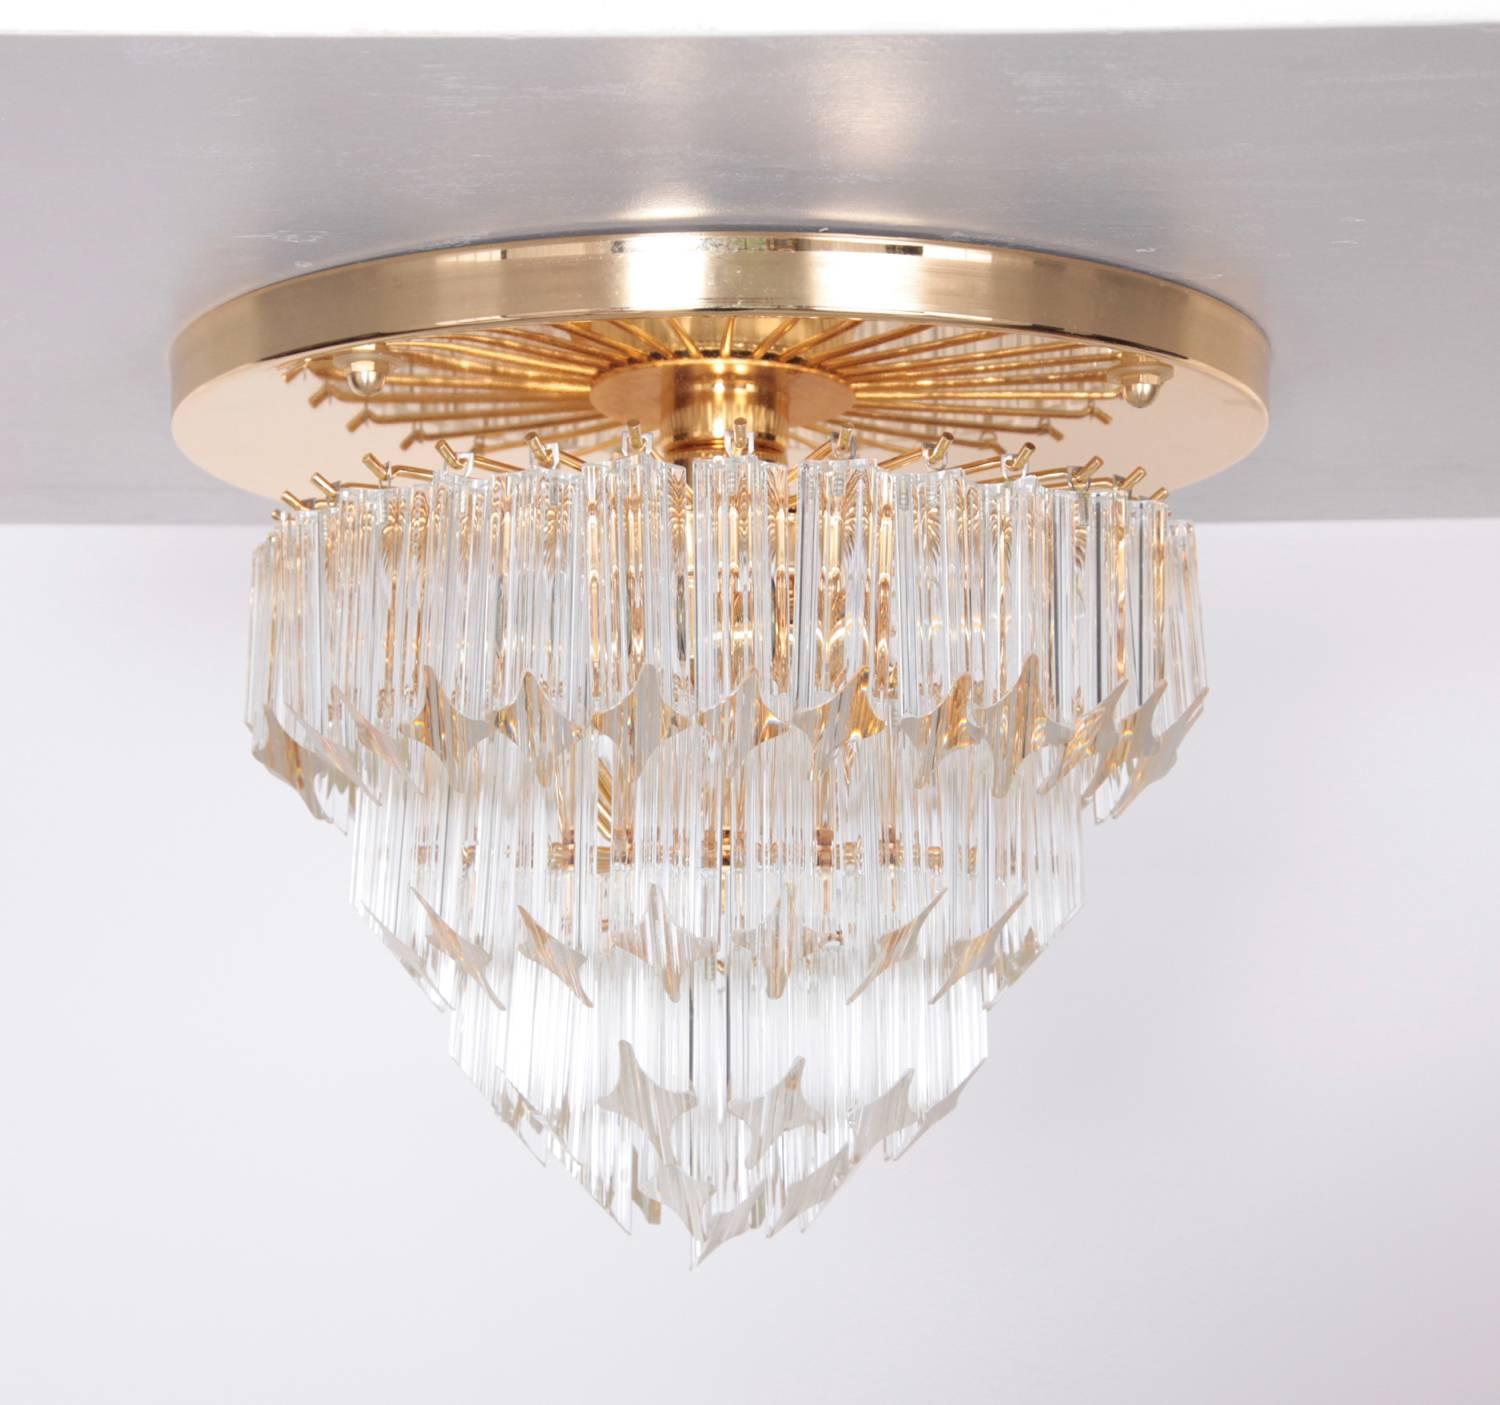 Beautiful ceiling lamp Astra Quadrilobo by Venini, Italy from the 1970s. 
The wall plate is made of brass and the shade contains 77 solid glasses.
Some of the glass parts have small chips but they are hardly visible as you can see on the